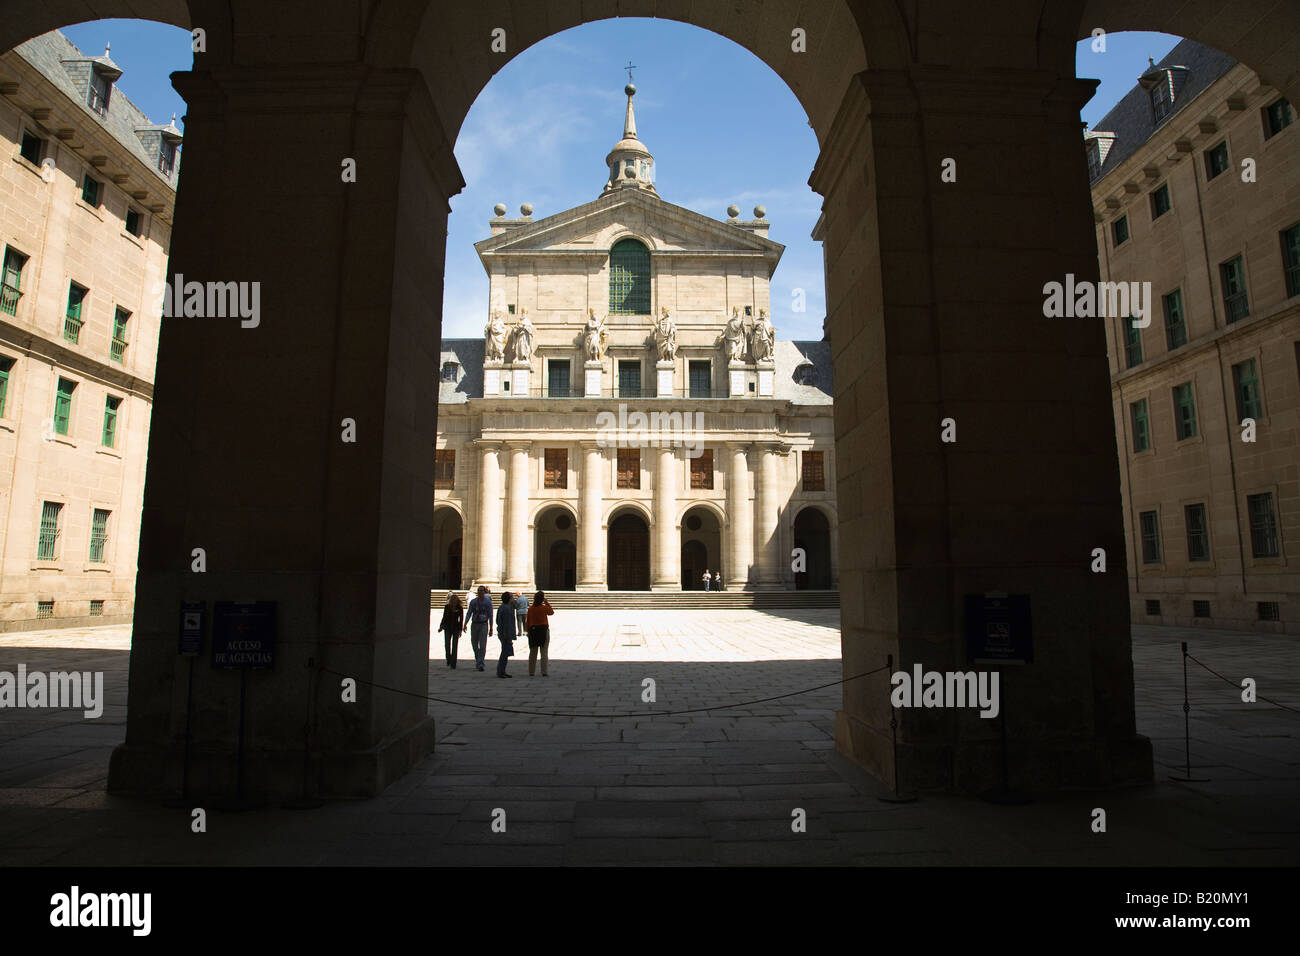 SPAIN El Escorial Front of Basilica and Patio of the Kings at palace built in 16th century by King Philip II view through arches Stock Photo